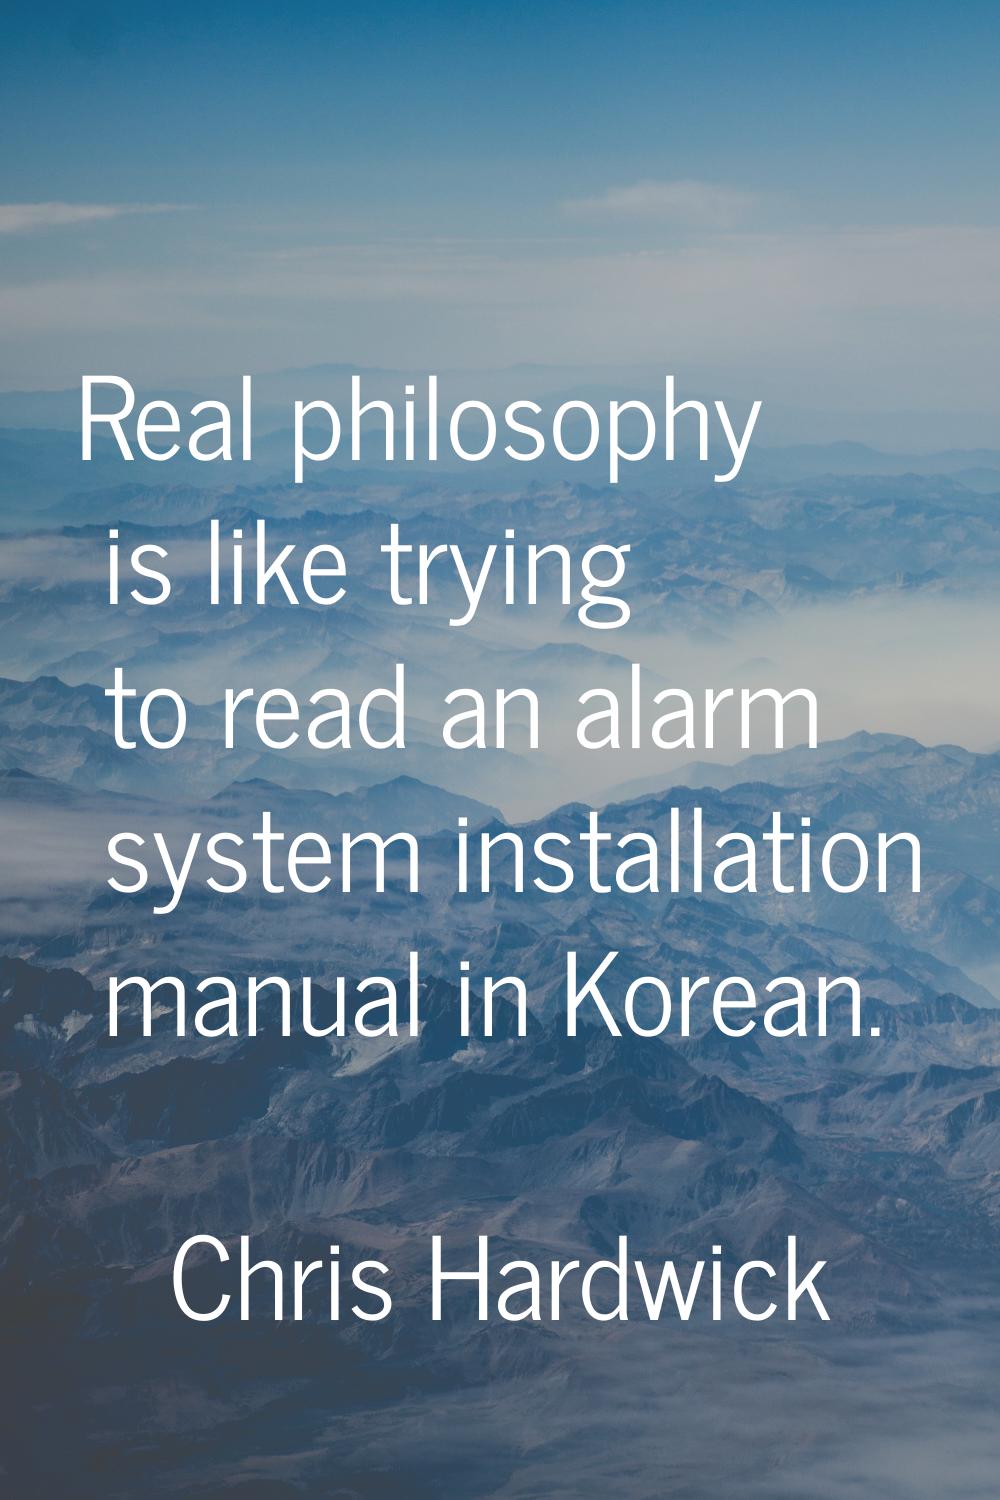 Real philosophy is like trying to read an alarm system installation manual in Korean.